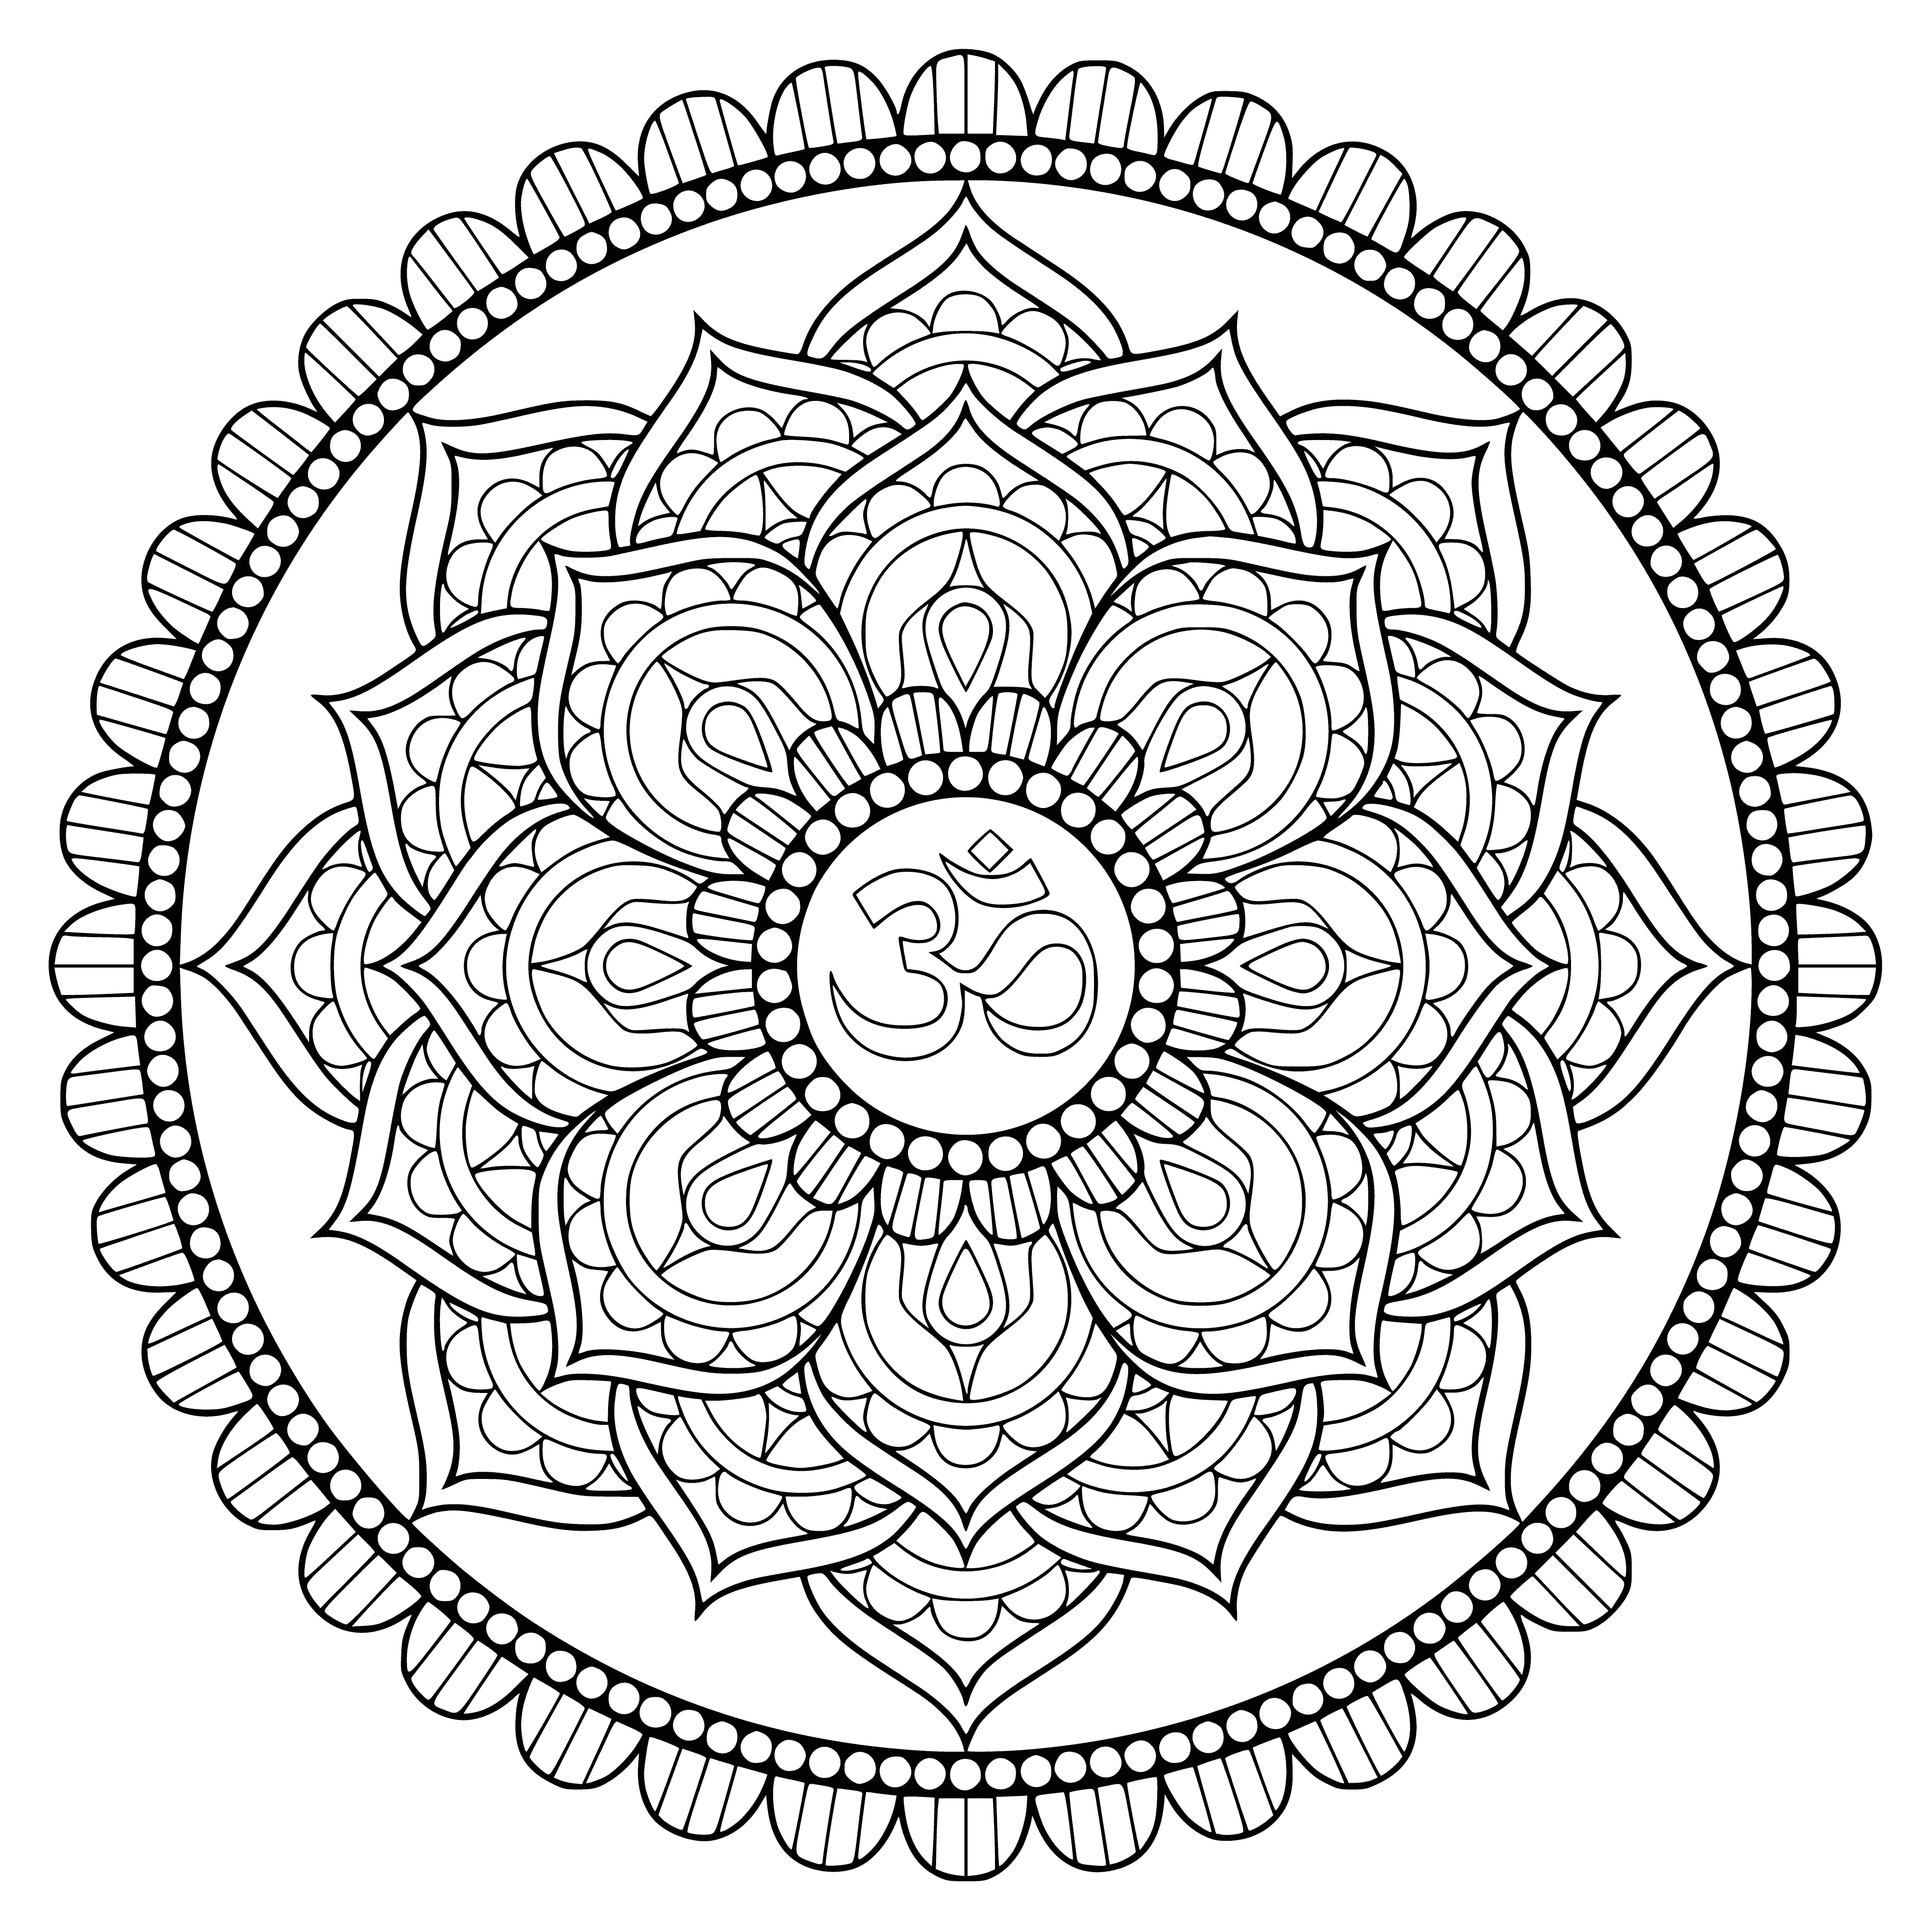 coloring page: A mandala with Om at the center is made of varied patterns, shapes & symbols. #mandala